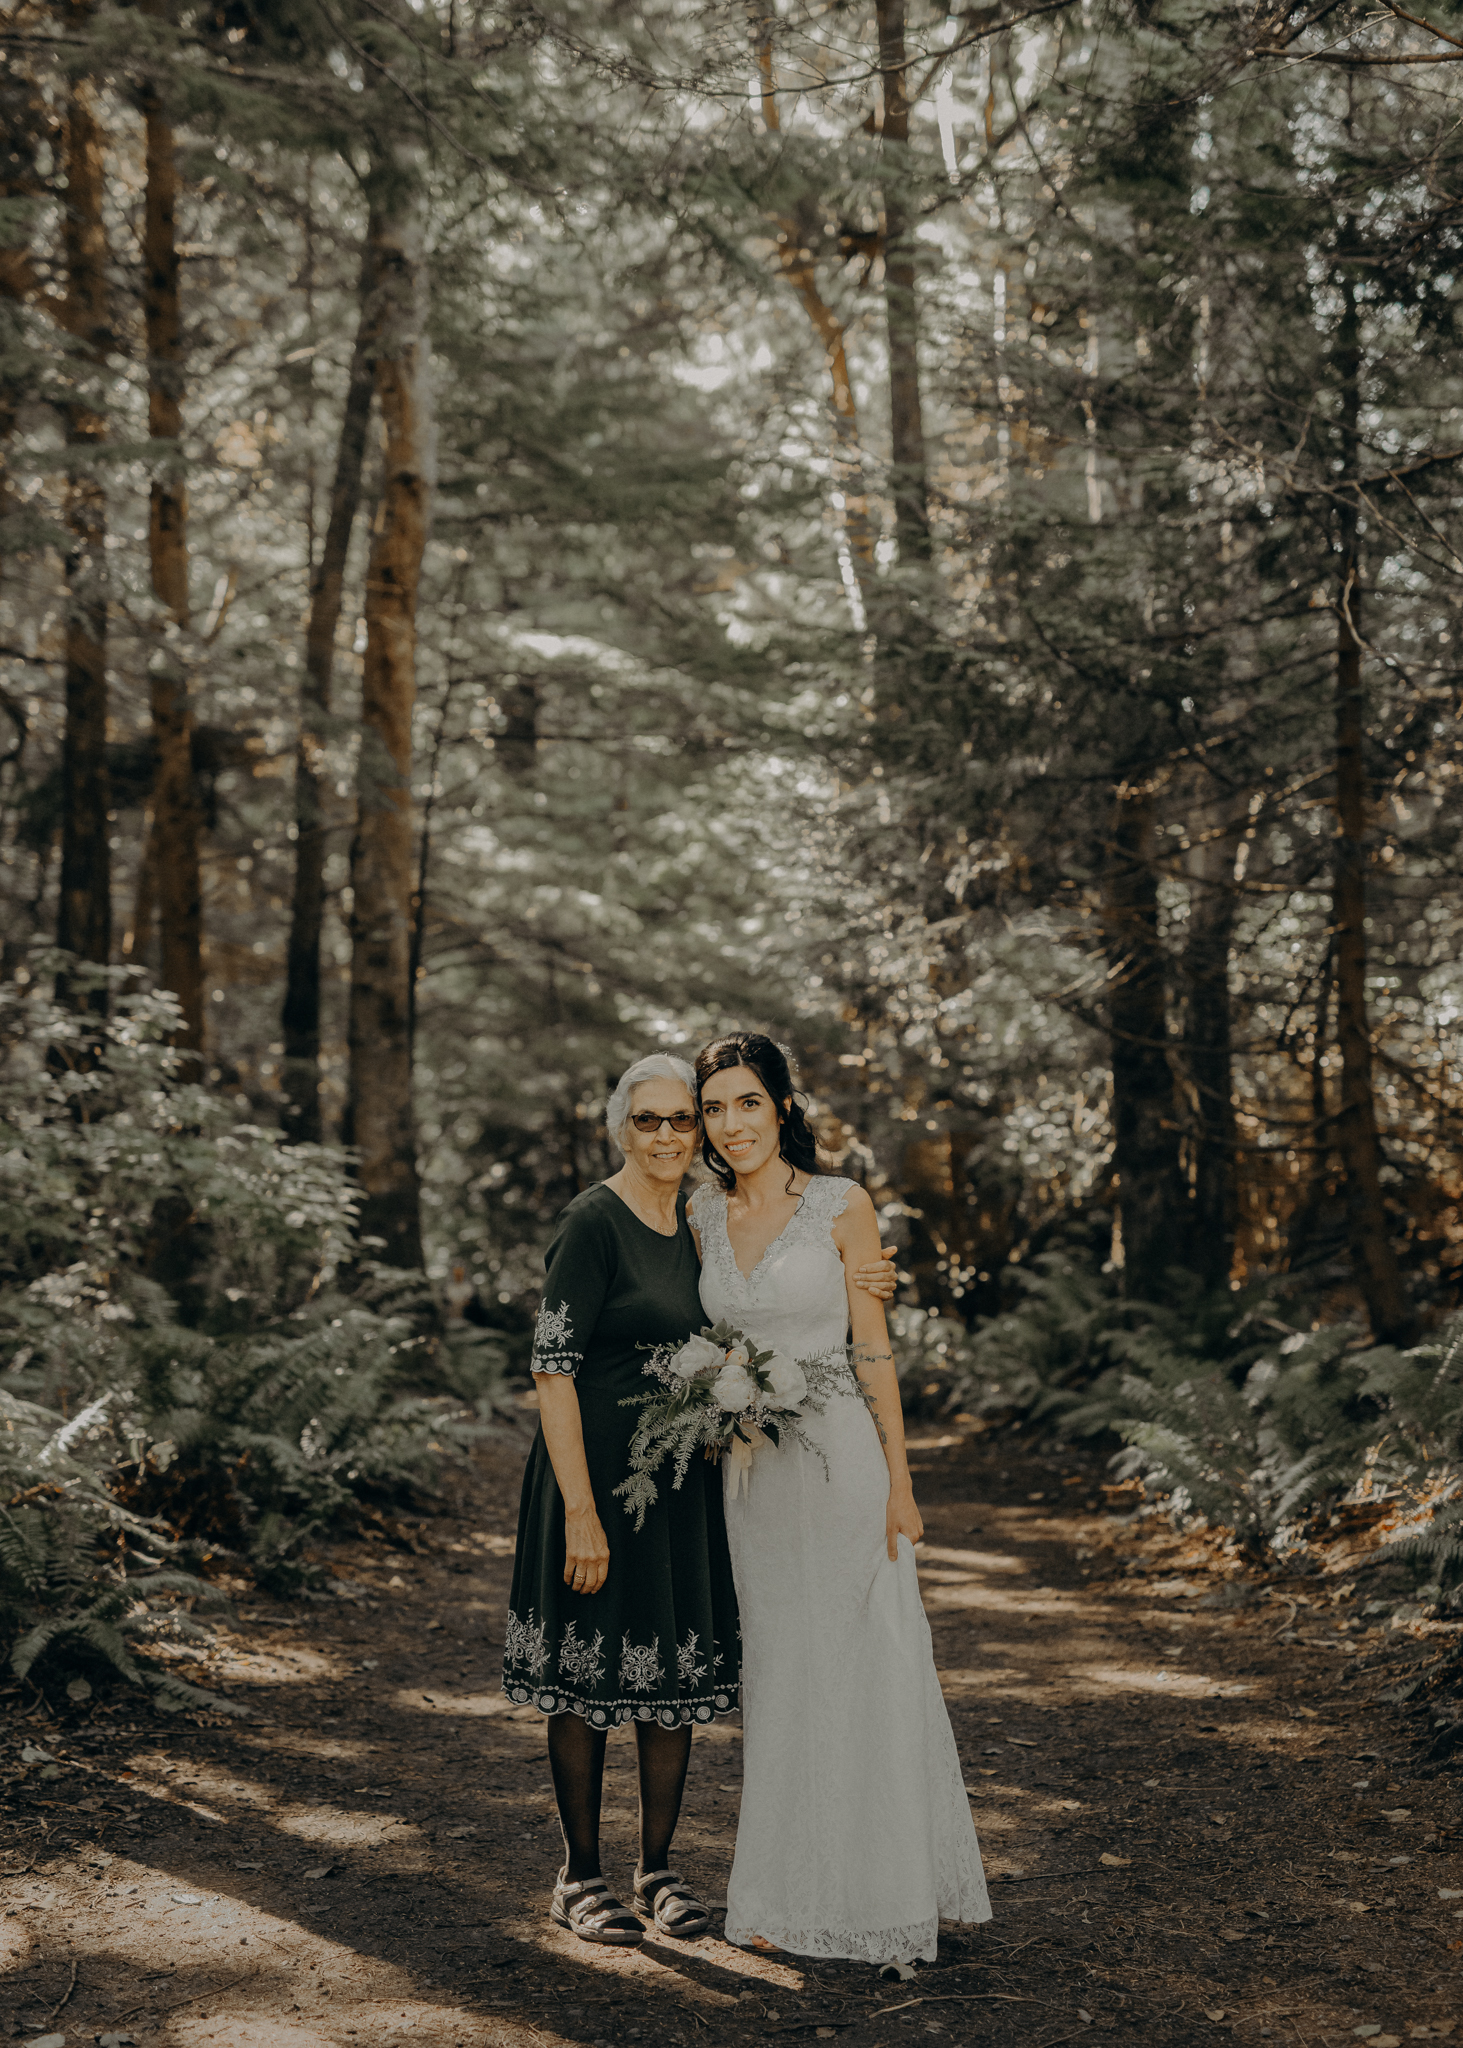 Isaiah + Taylor Photography - Cape Flattery Elopement, Olympia National Forest Wedding Photographer-029.jpg